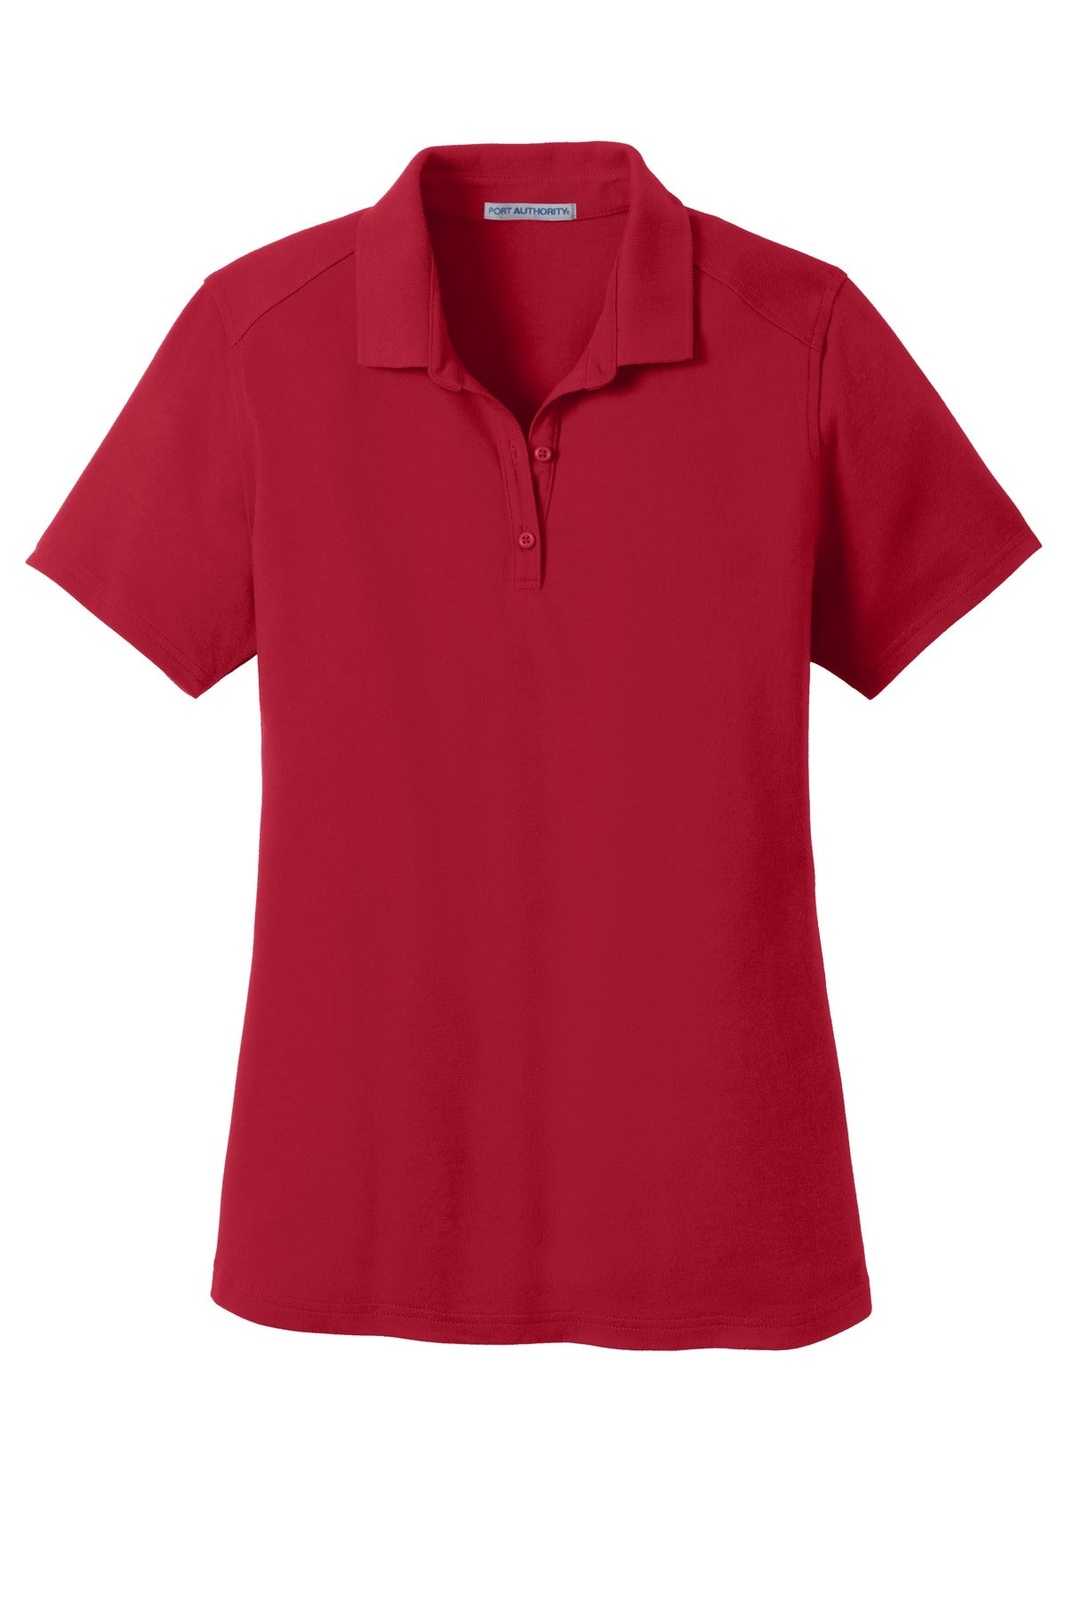 Port Authority LK164 Ladies Superpro Knit Polo - Rich Red - HIT a Double - 5